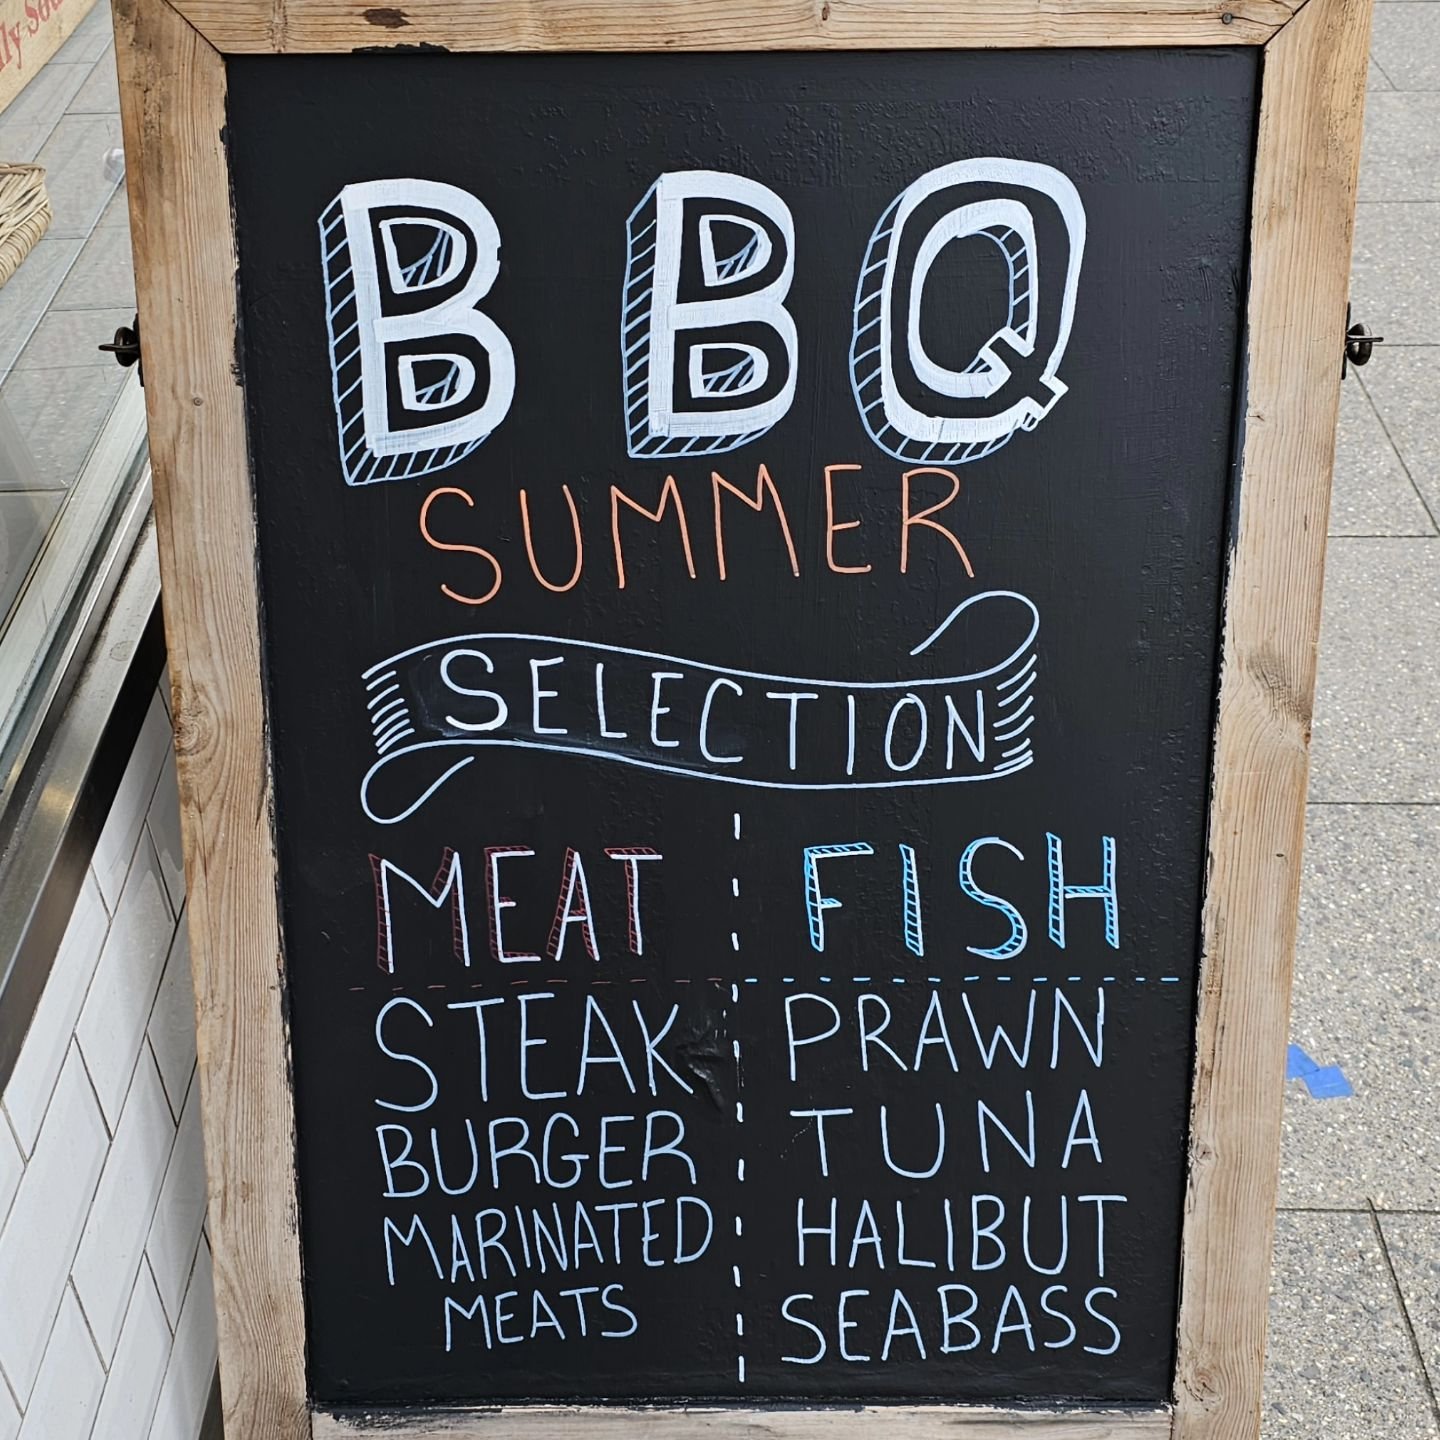 We've got it all in store! I might have been a bit eager by proclaiming that summer has arrived....

#sydenham #sydenhammums #dulwichmums #crystalpalacemums #nightin #butchers #freerange #fish #fishmongers #shopindependent #shopsmallbusiness #foodieo